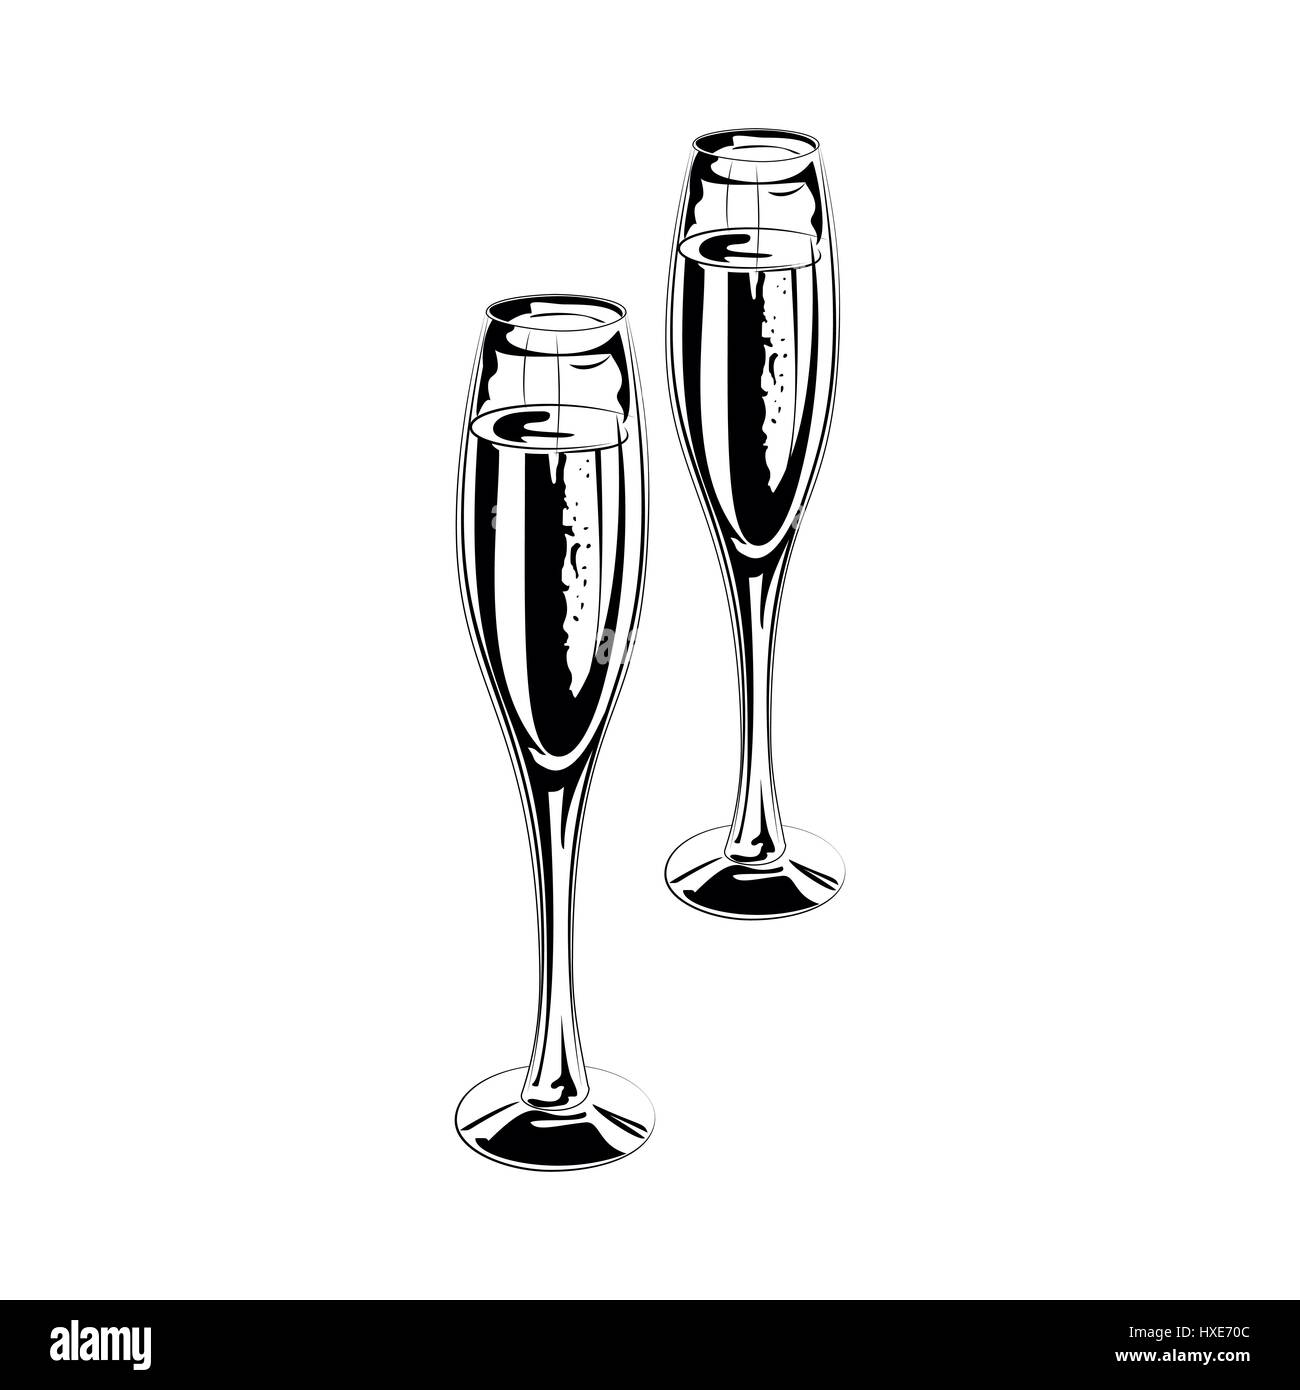 https://c8.alamy.com/comp/HXE70C/pair-of-champagne-glasses-of-sketch-style-vector-illustration-isolated-HXE70C.jpg